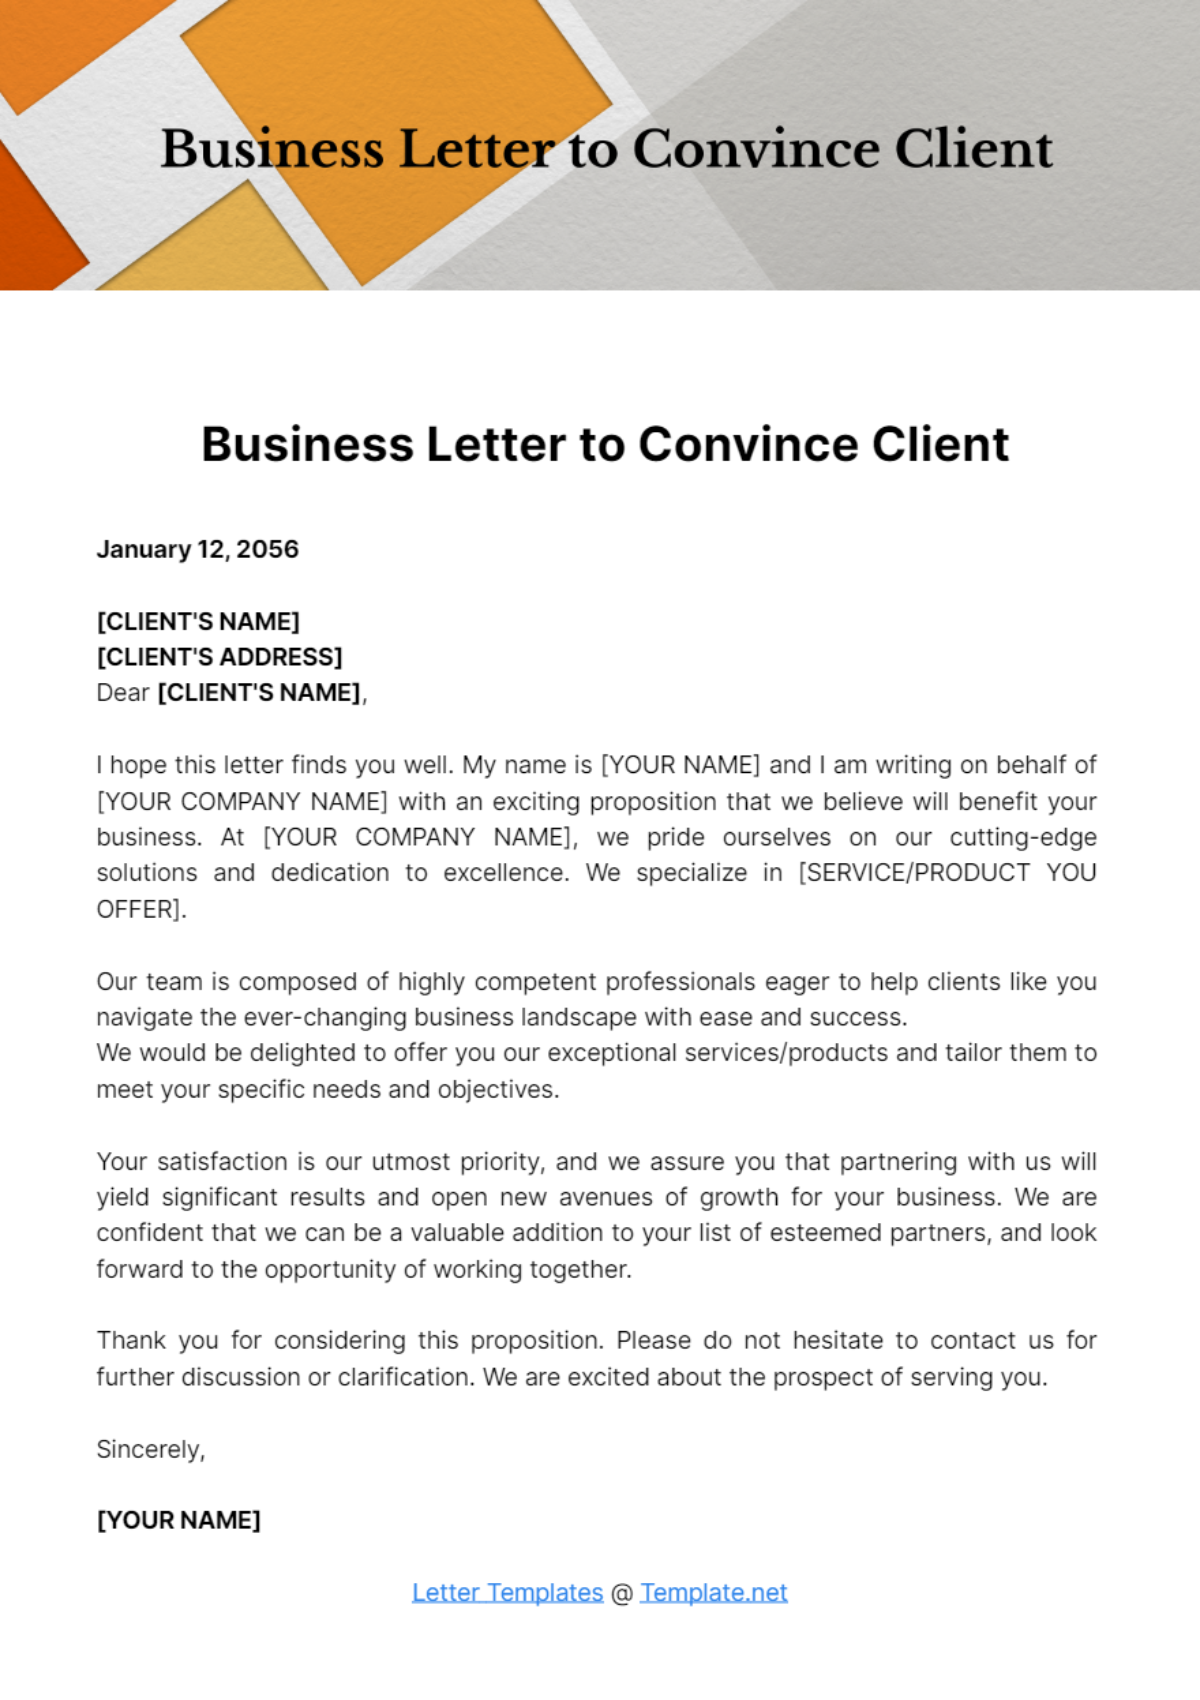 Free Business Letter to Convince Client Template